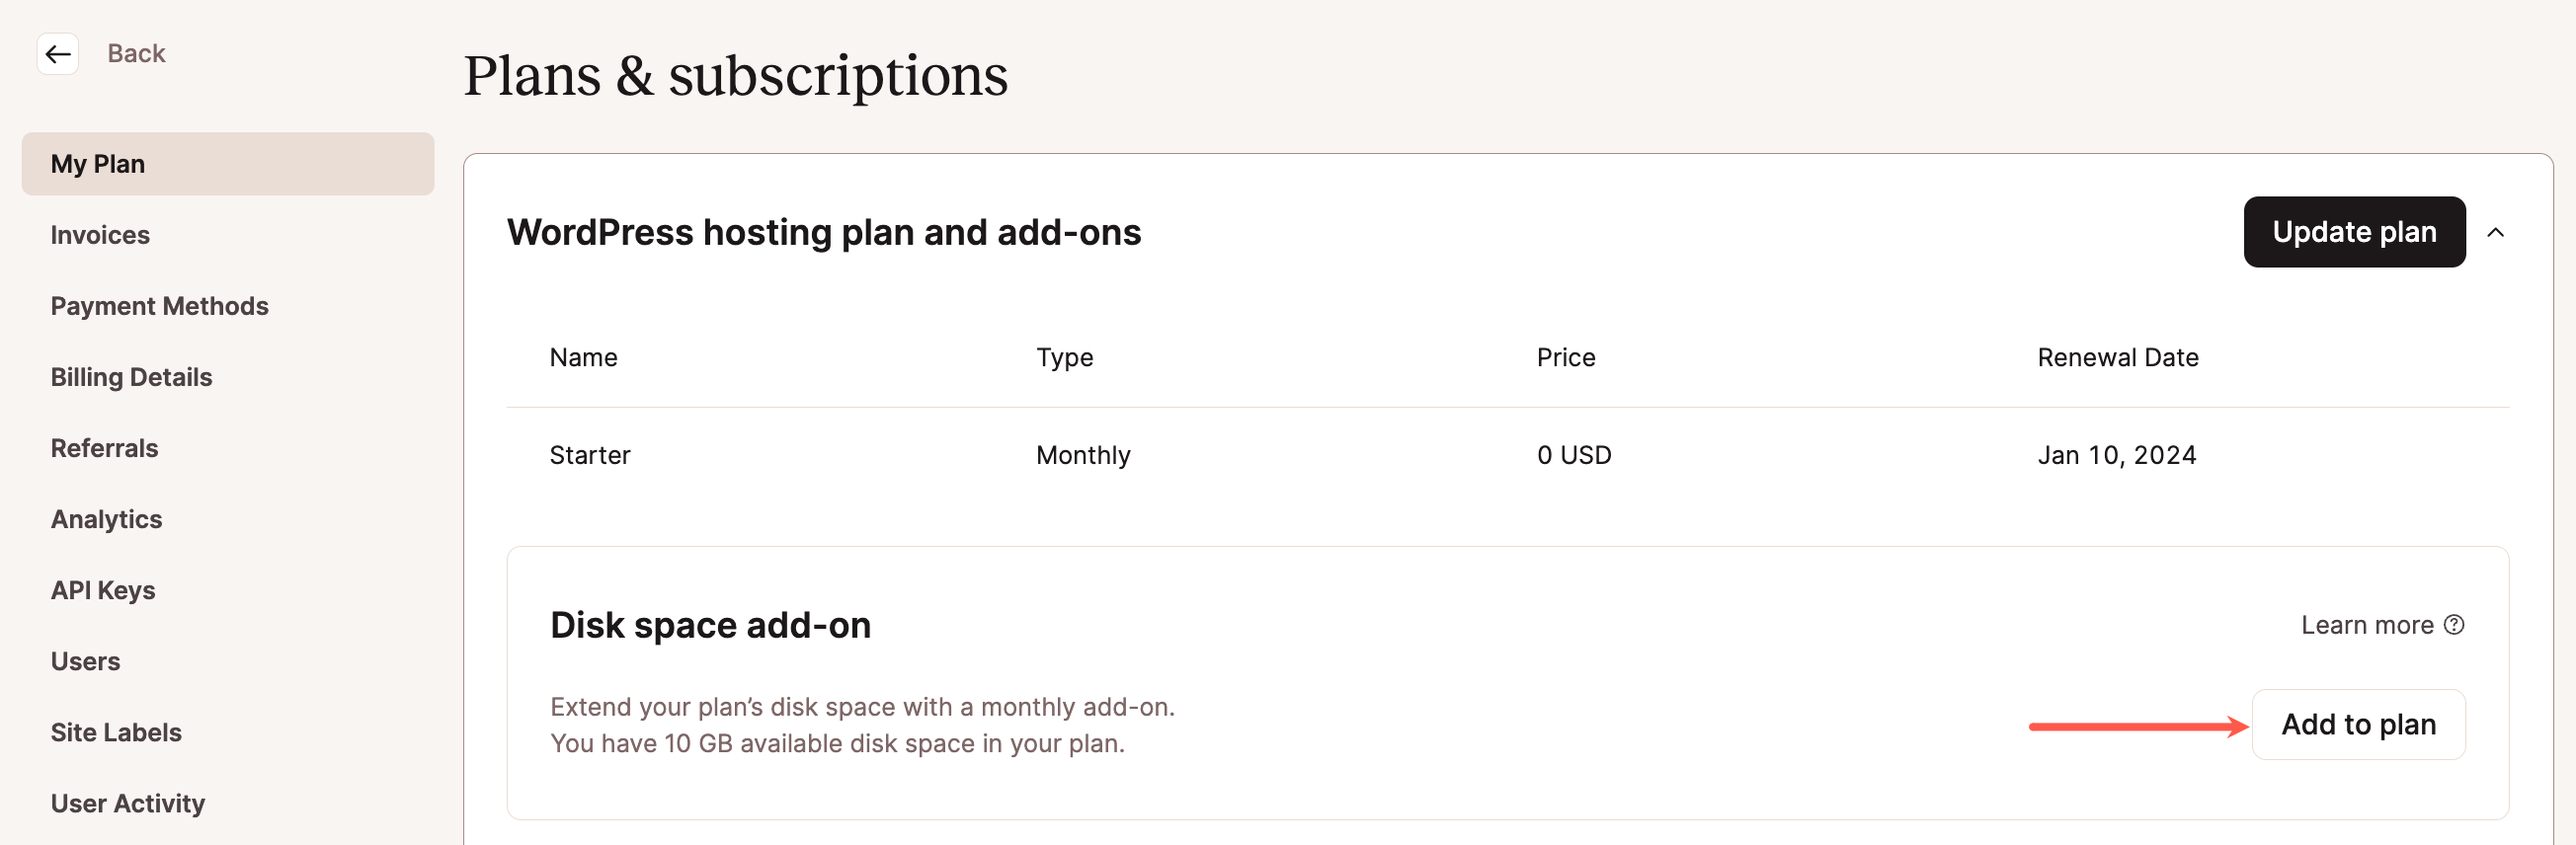 Add the disk space add-on to your plan in MyKinsta